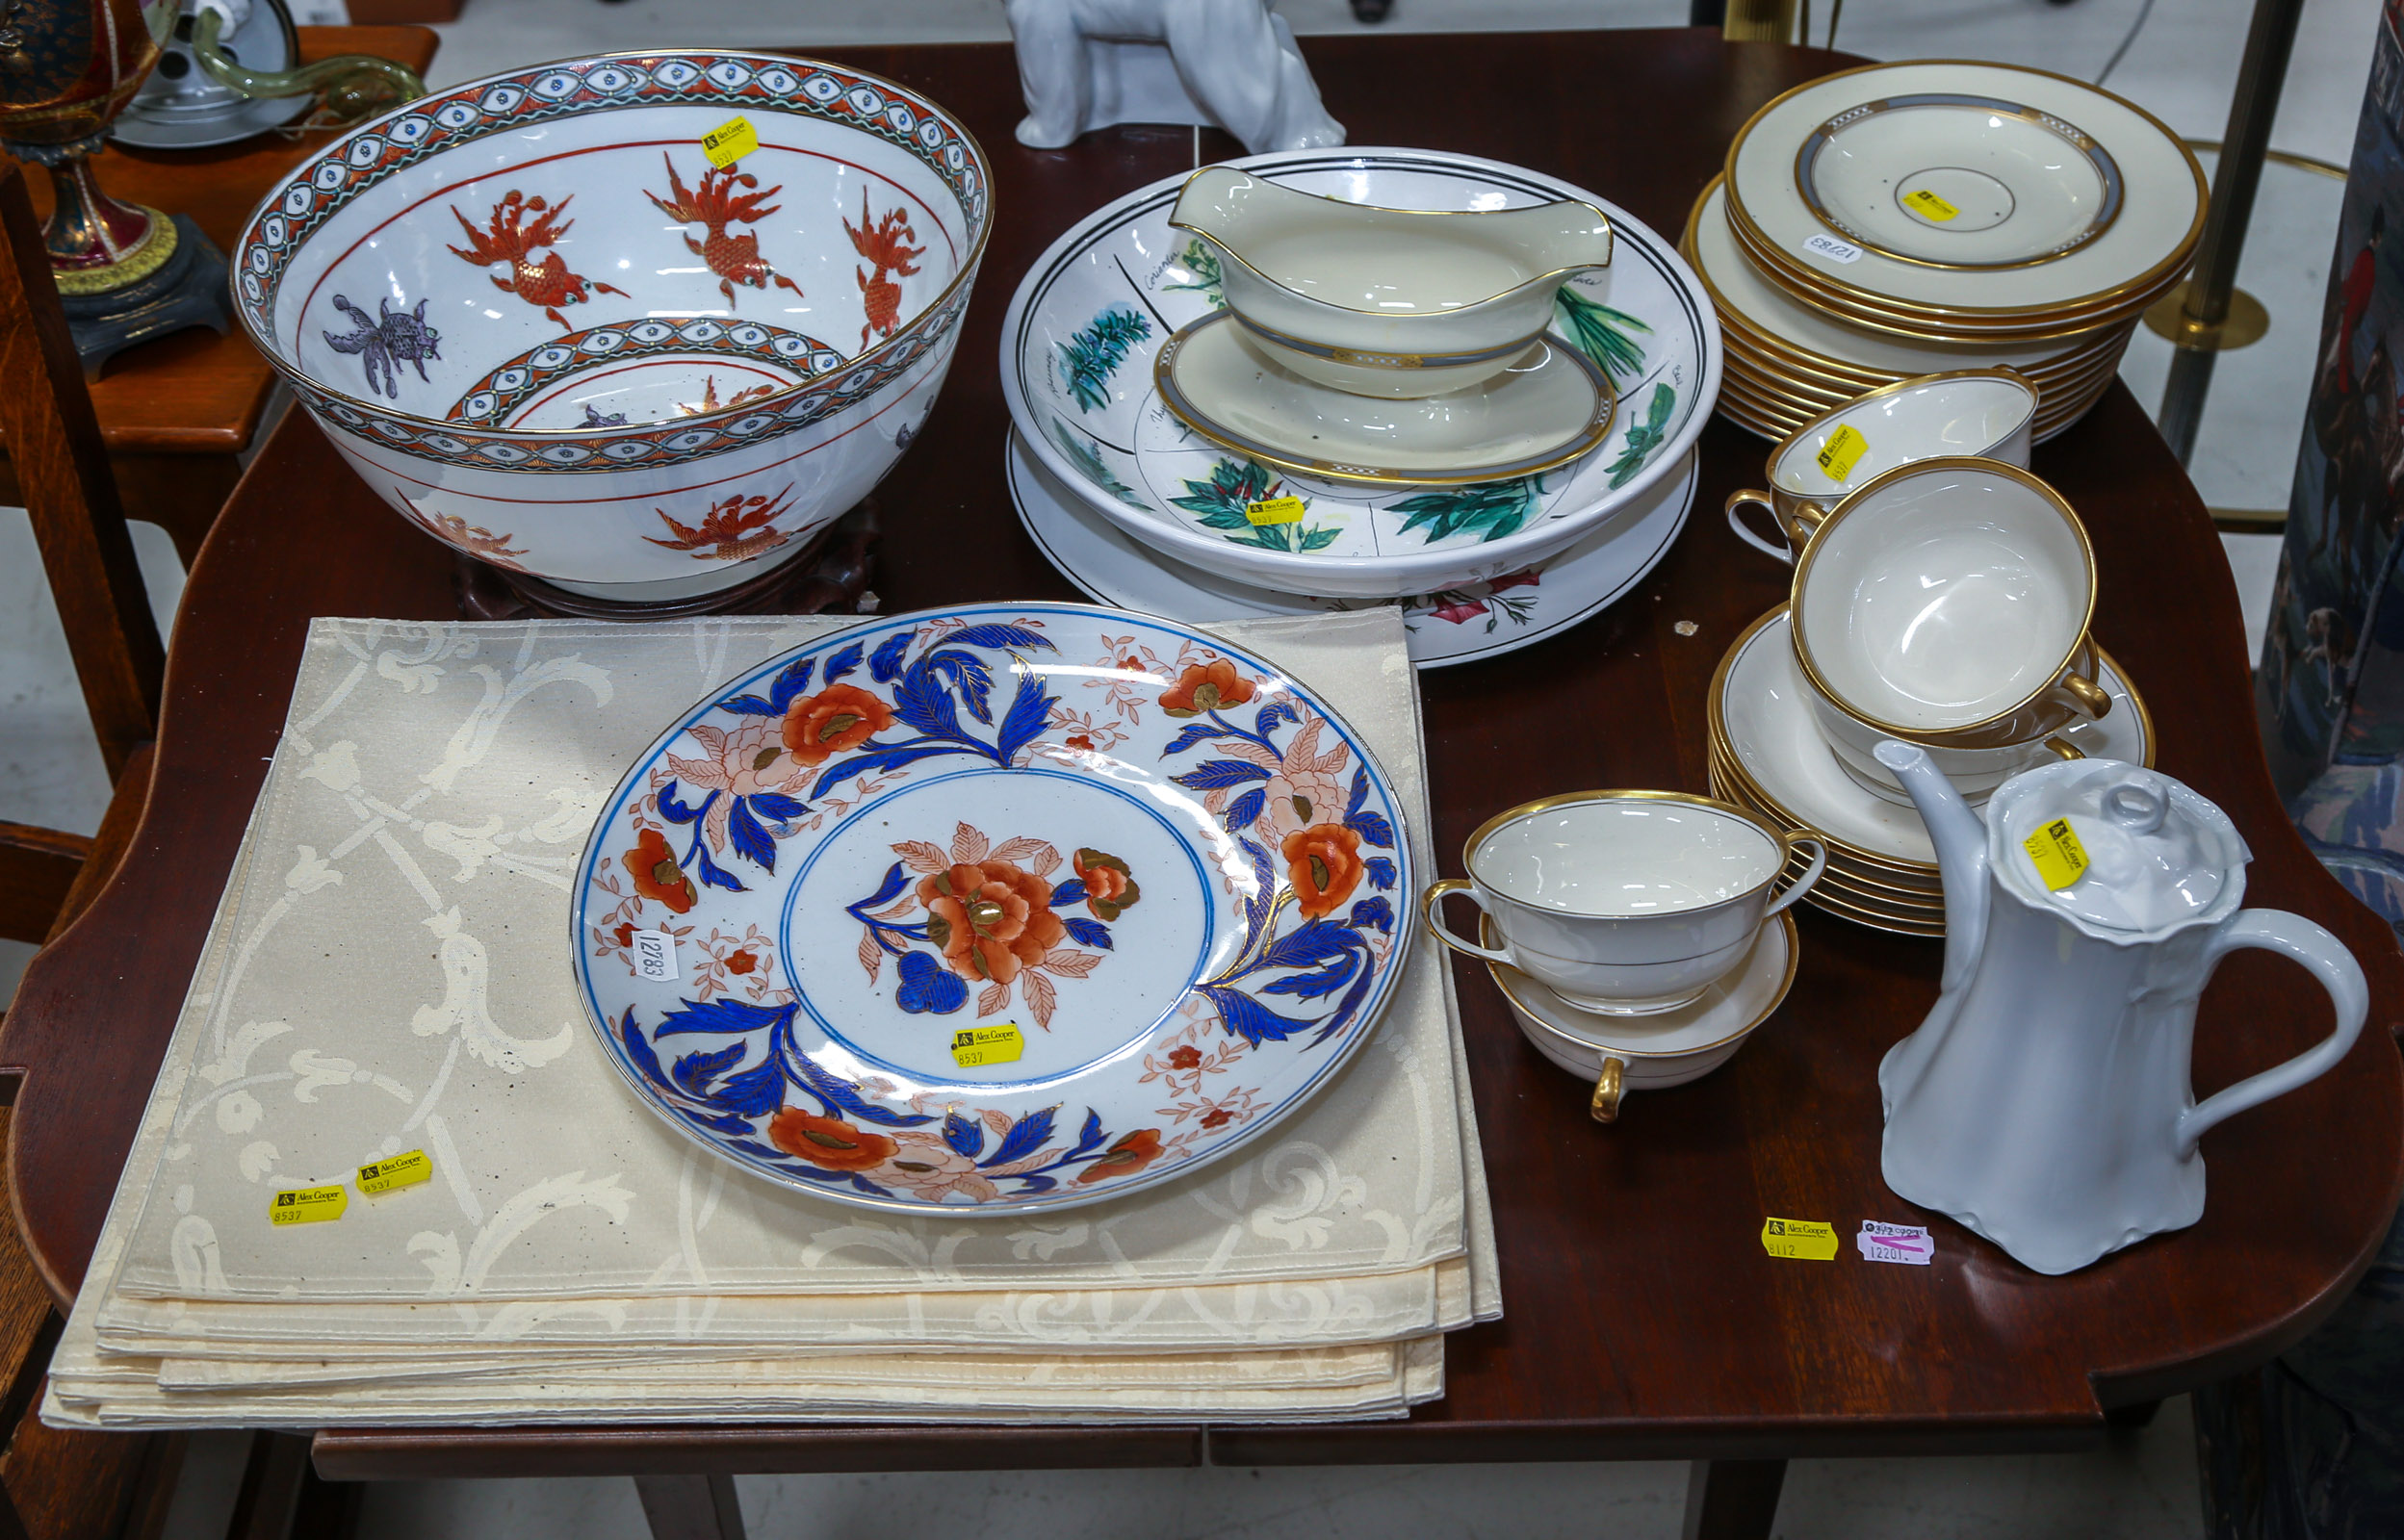 A GROUP OF TABLEWARE EIGHT PLACE 3cb38f